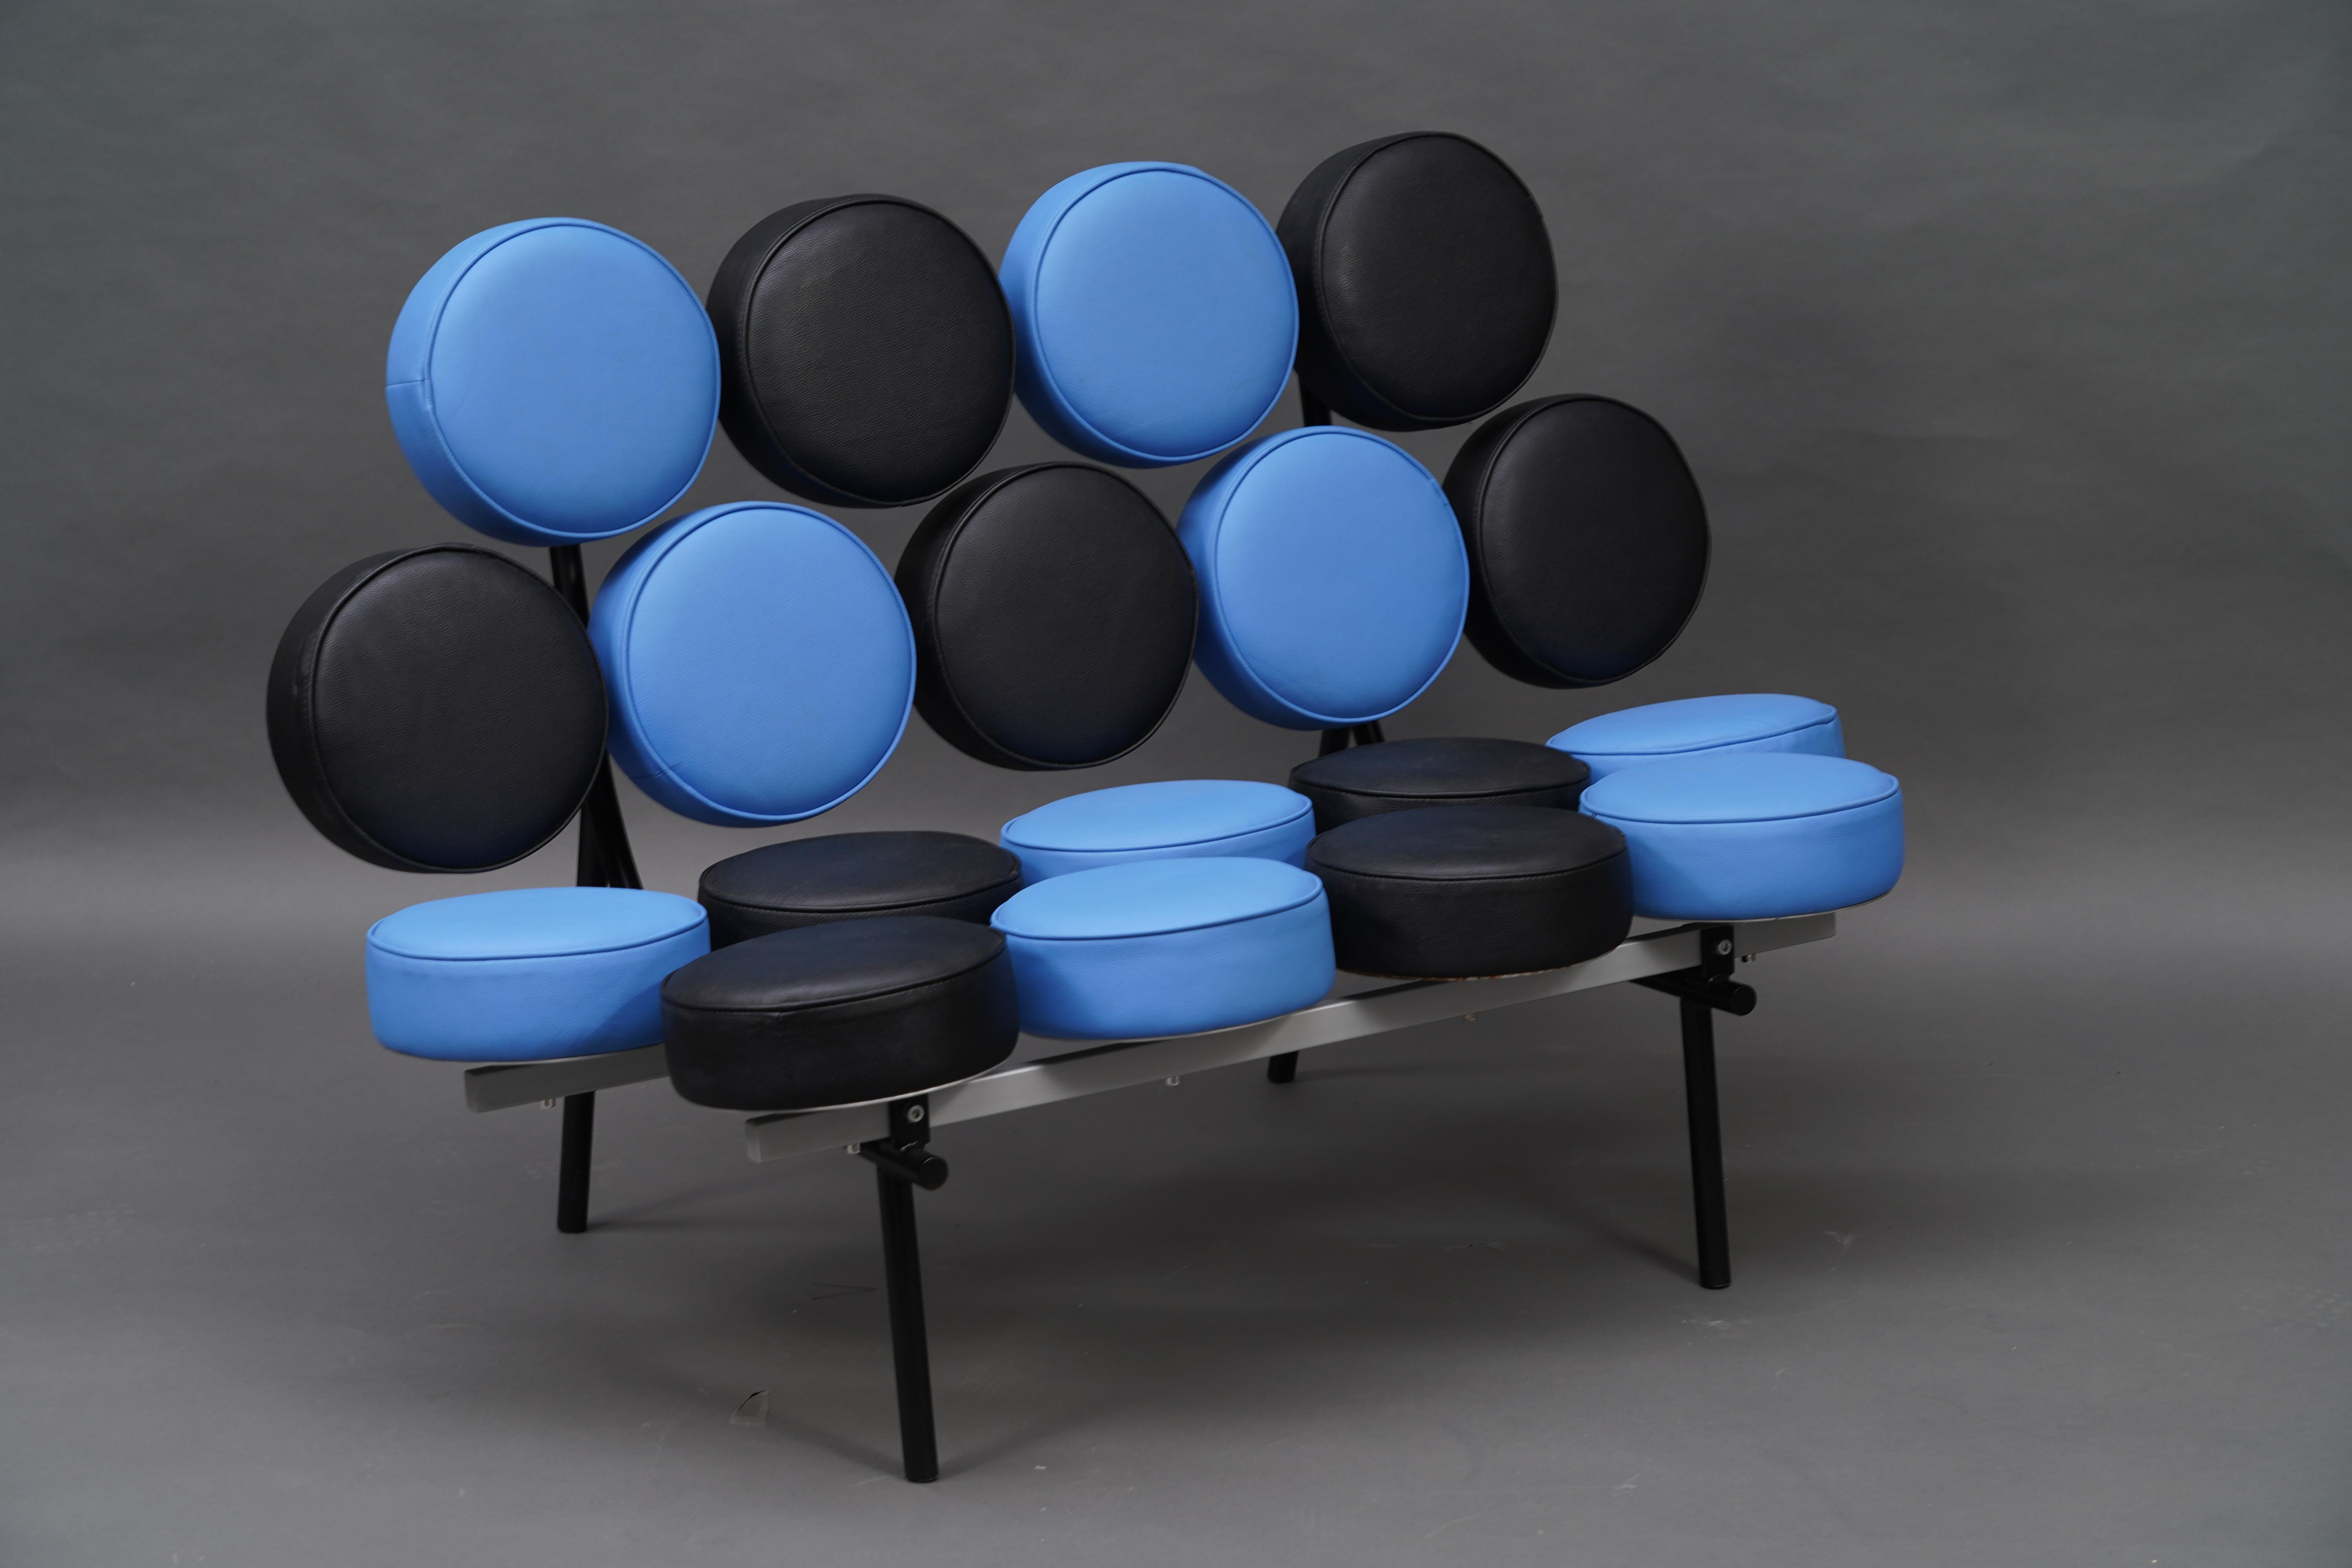 An icon of post-war design, the Marshmallow sofa represents an optimistic and heroic moment in American history. This unique sofa has a very recognizable design with 18 round, separate cushions that are held together by a chrome and black metal